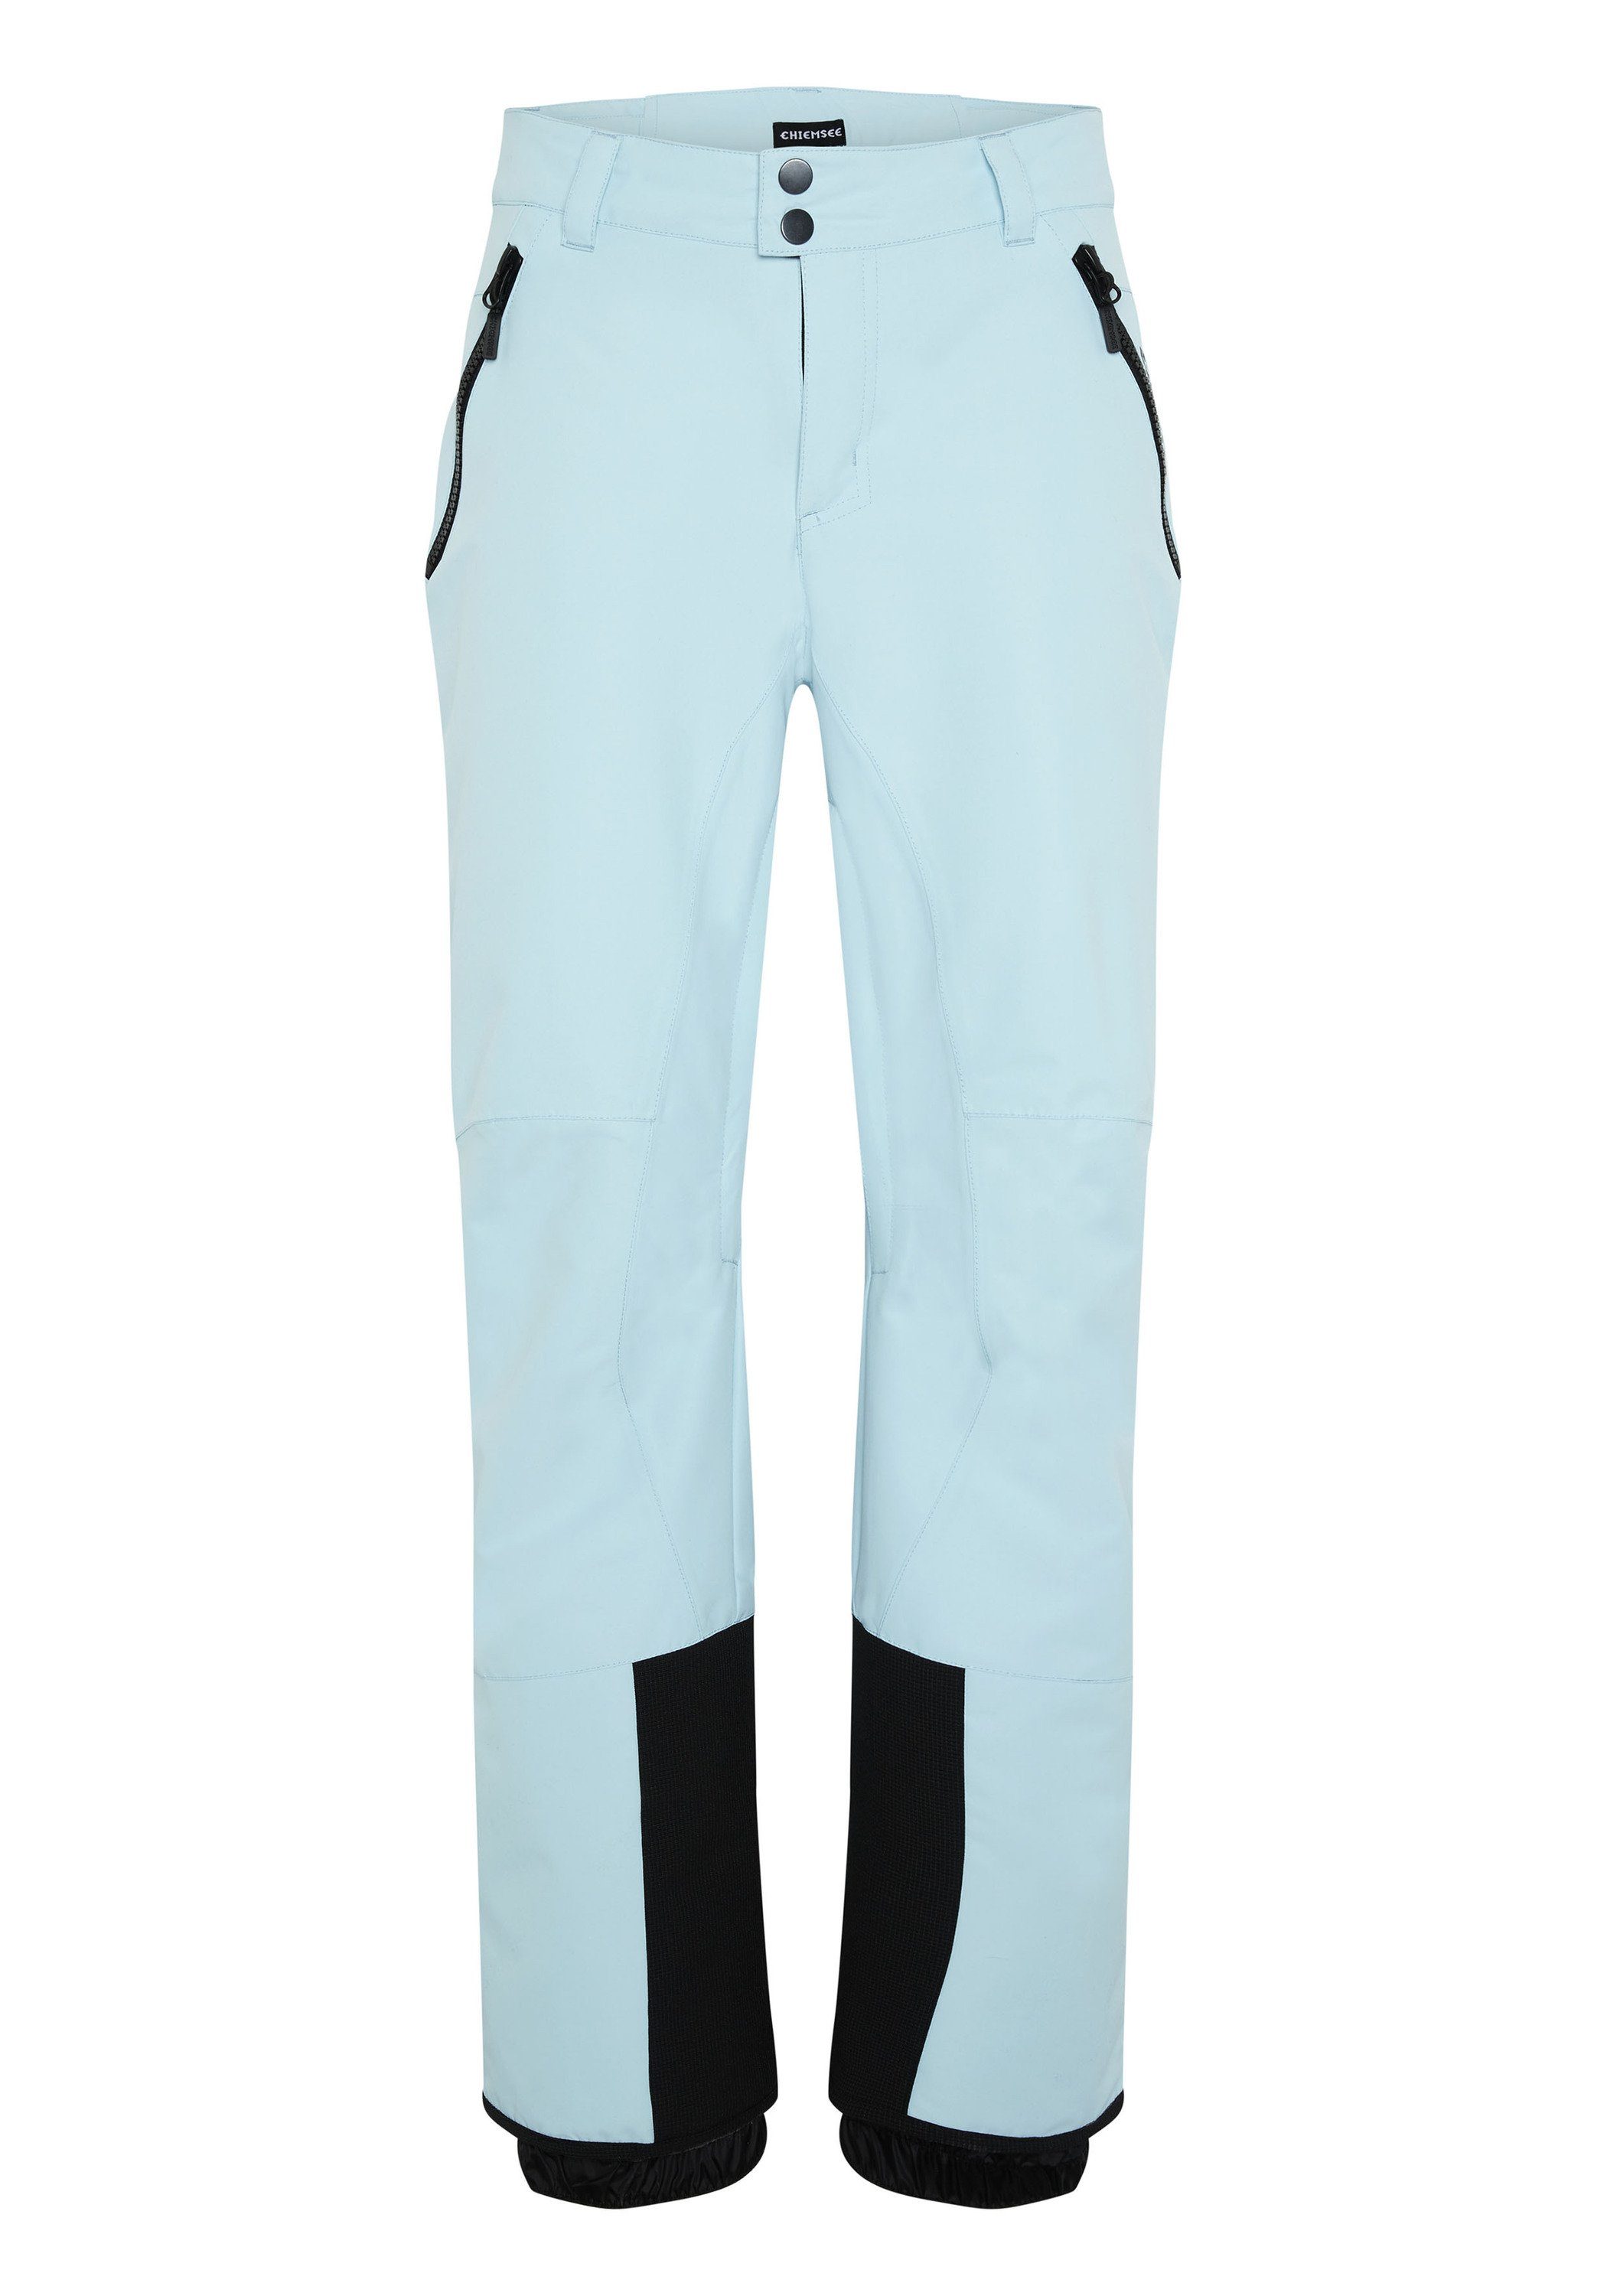 Chiemsee Sporthose Skihose mit Schneefang 1 Cool Blue